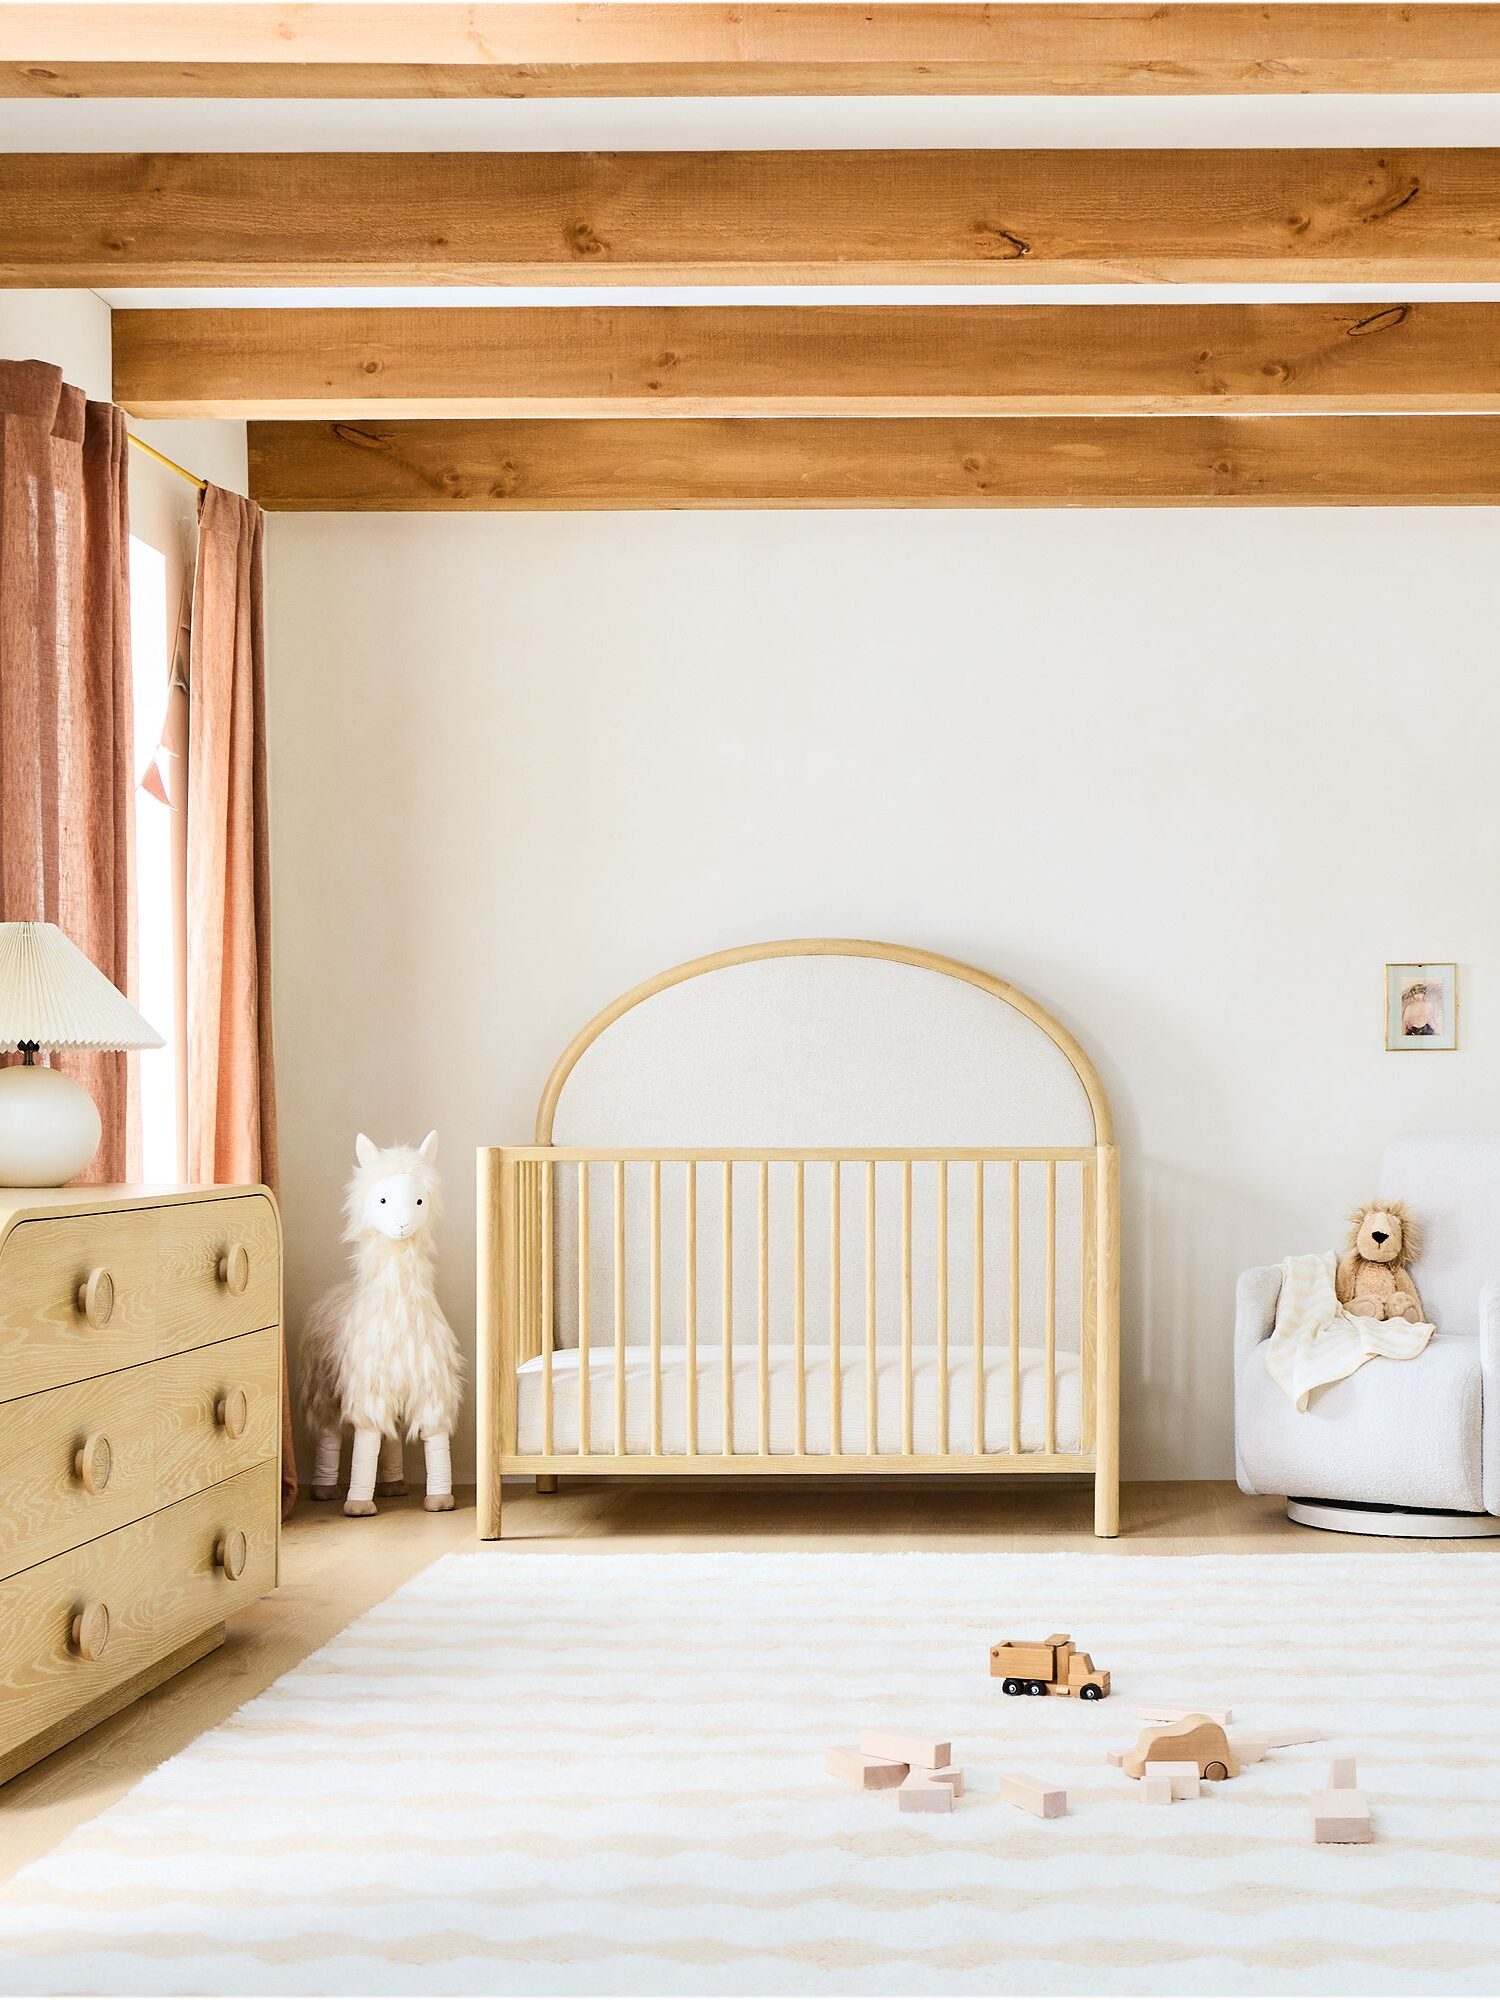 A natural wood crib in a bedroom